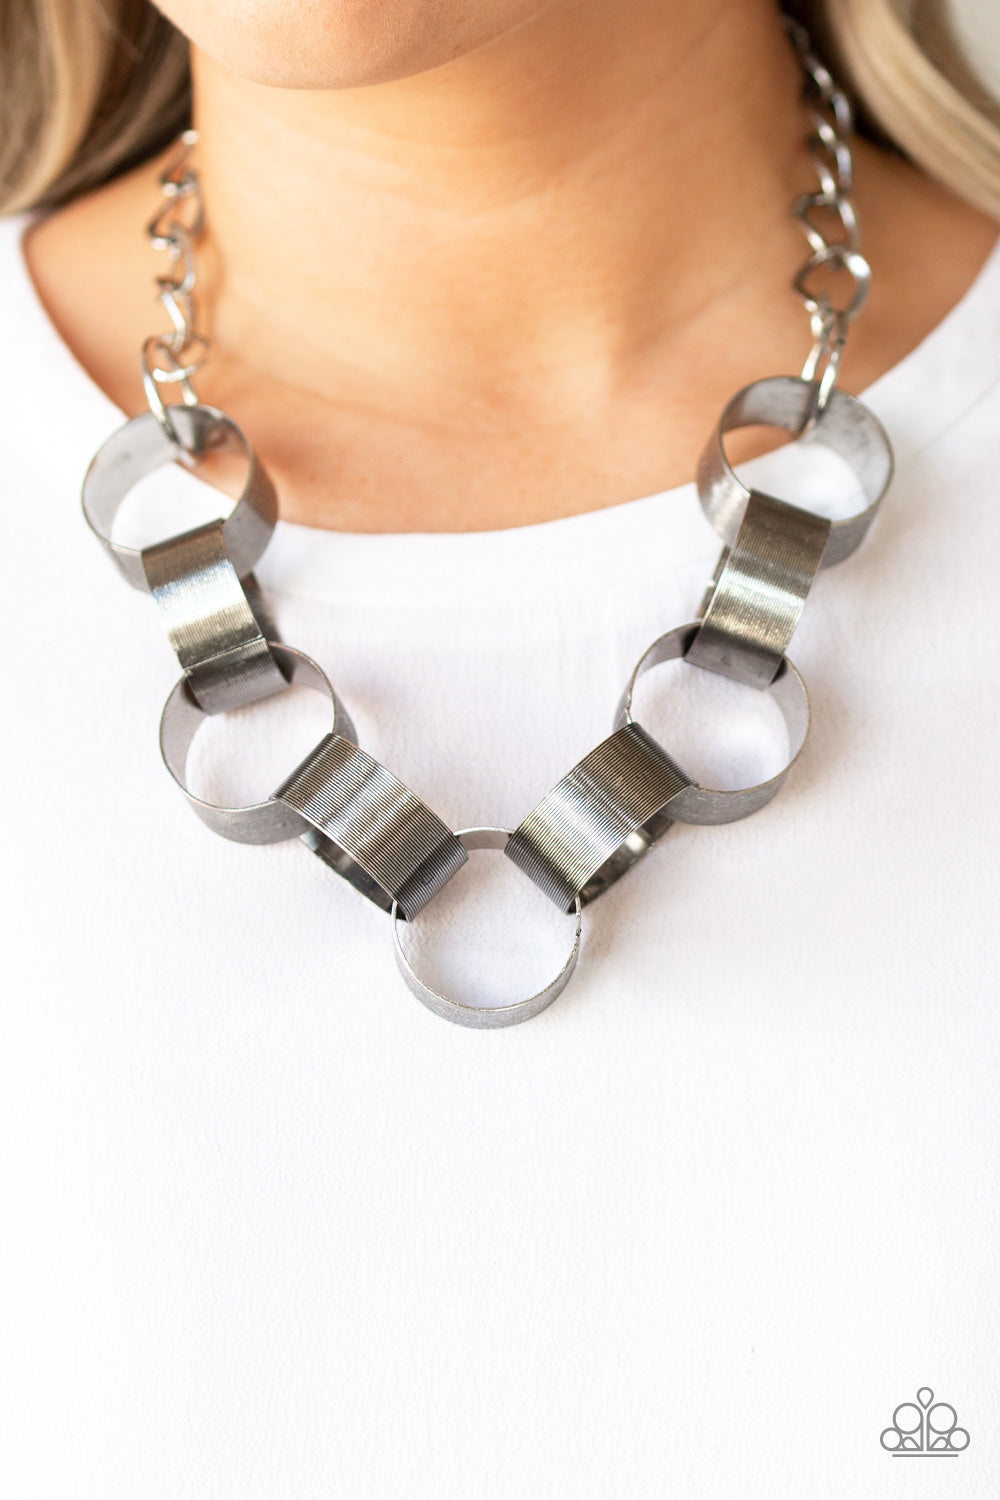 Paparazzi Accessories Big Hit - Silver Necklaces - Lady T Accessories